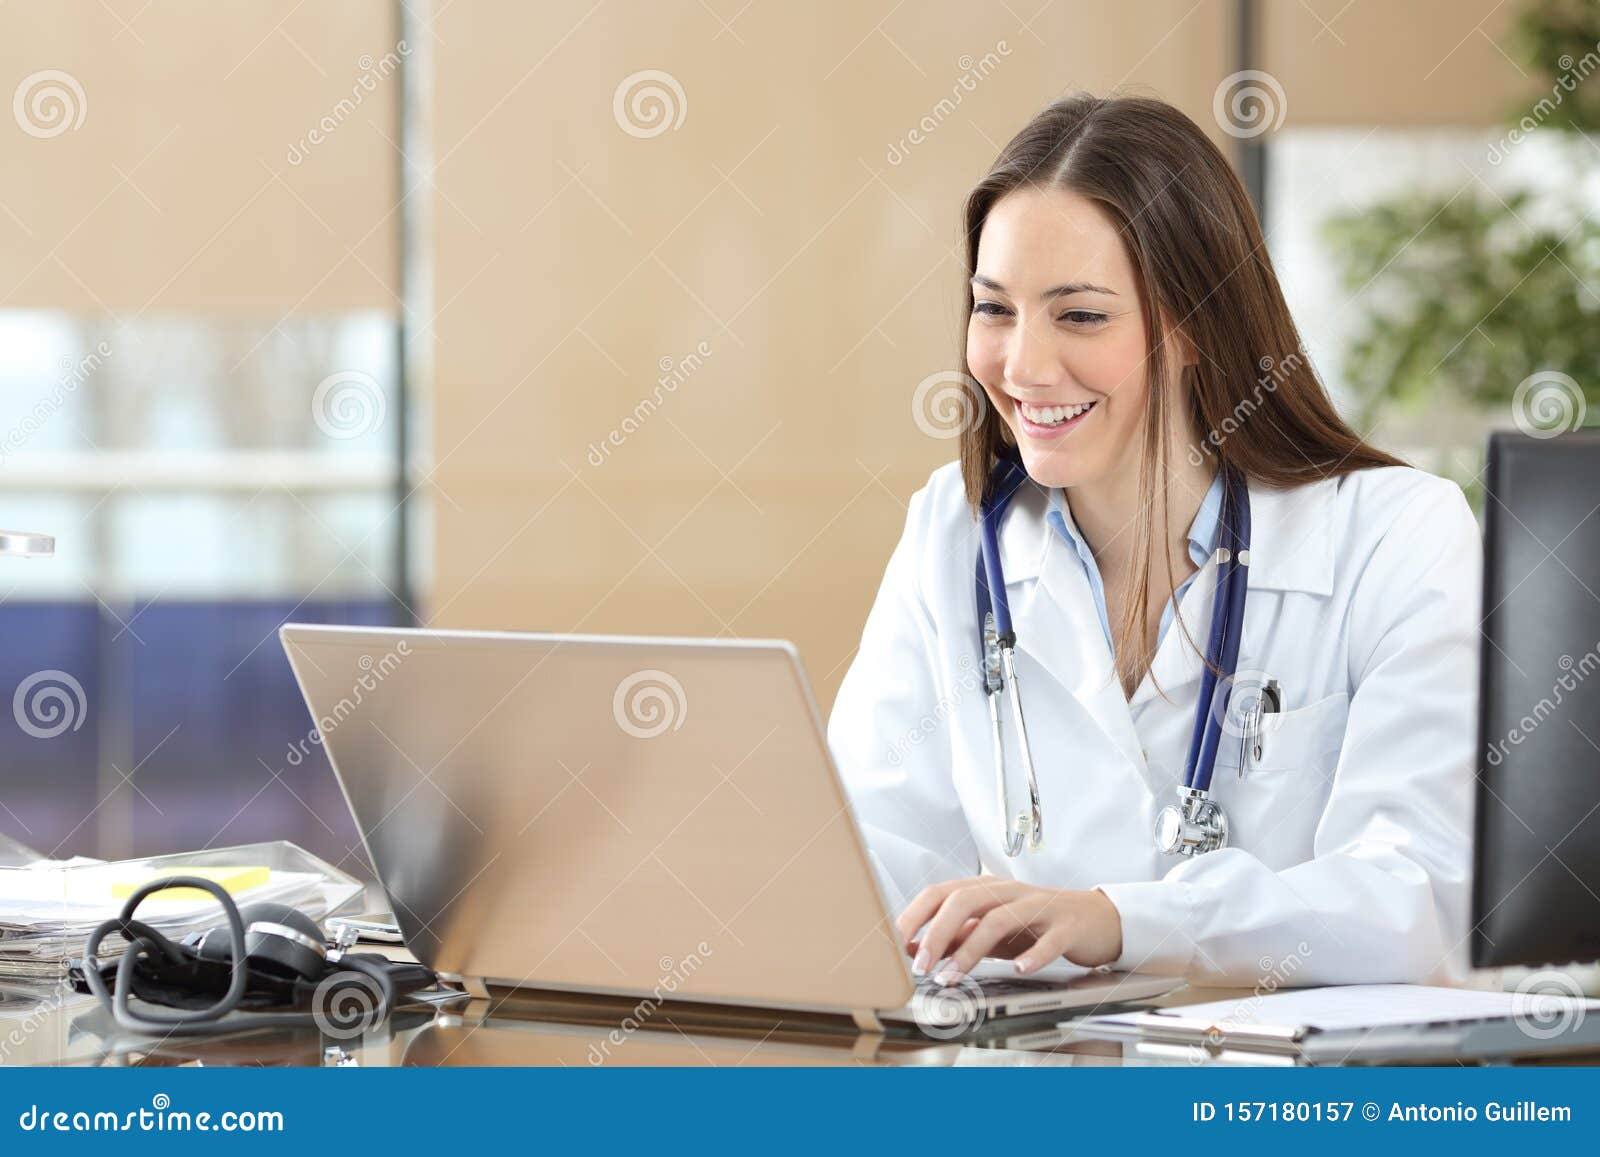 happy doctor using a laptop at consultation